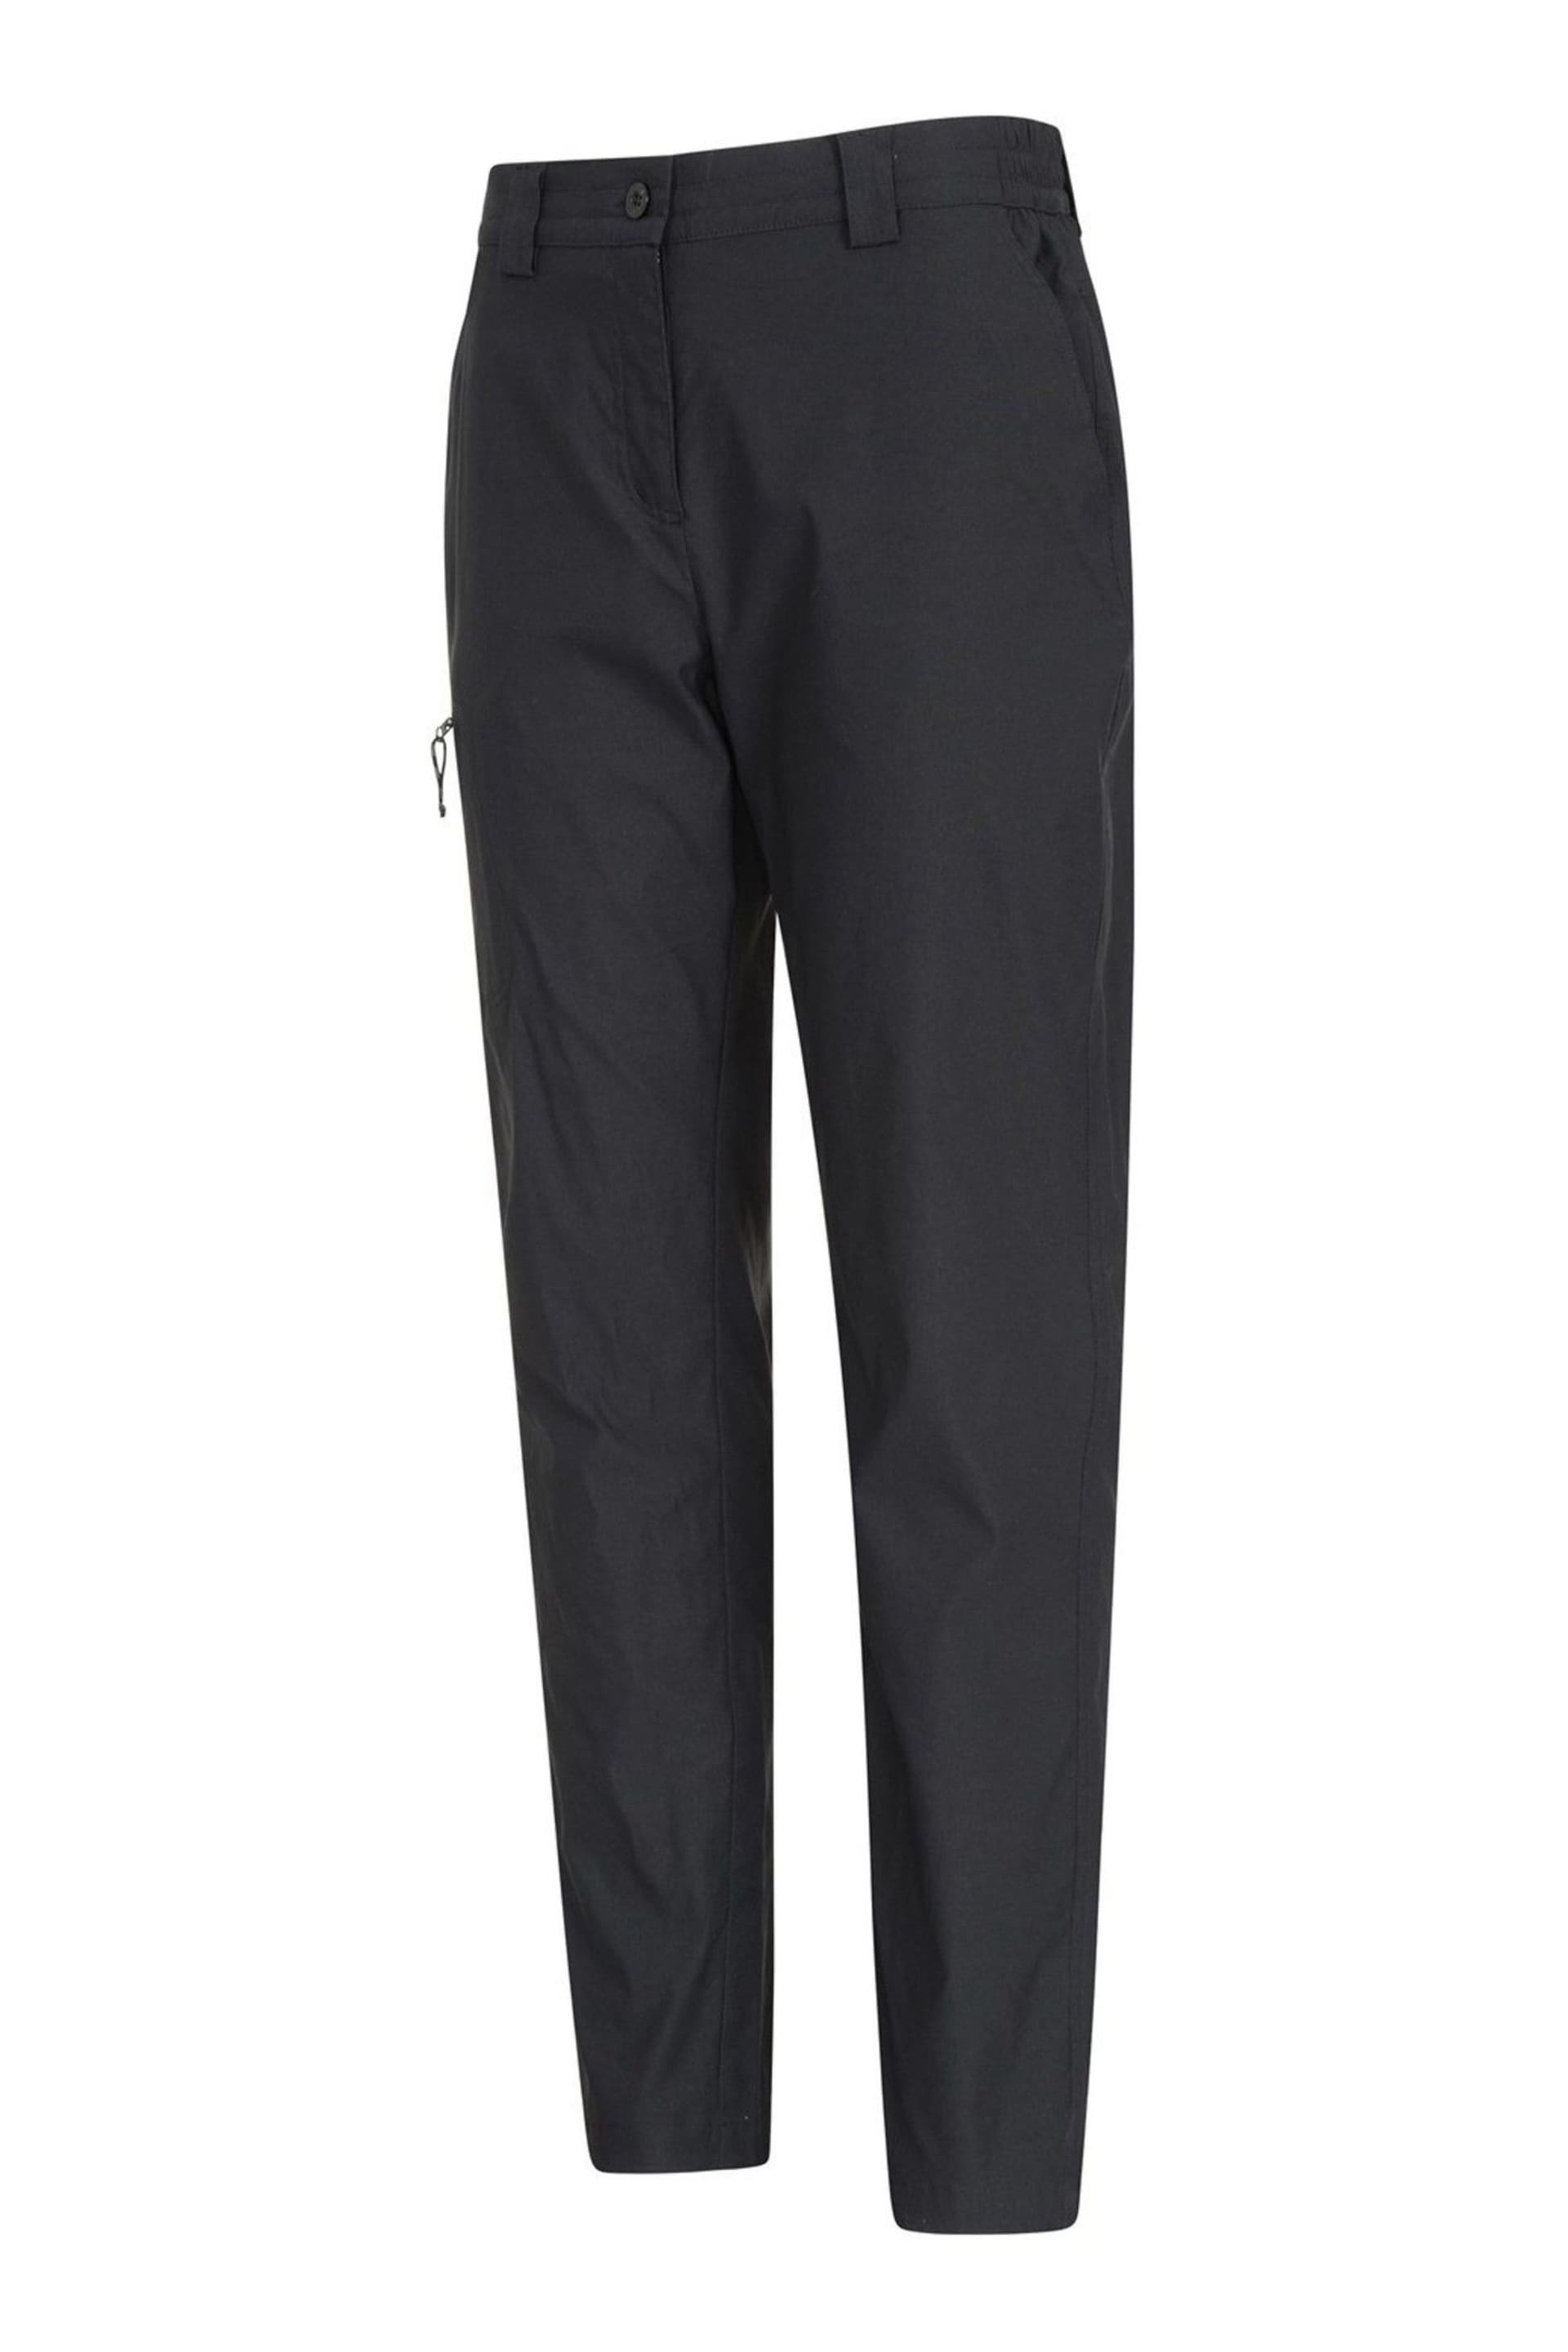 Mountain Warehouse Black Short Length Lightweight Stretch UV Protect Walking Hiker Womens Trousers - Image 3 of 4